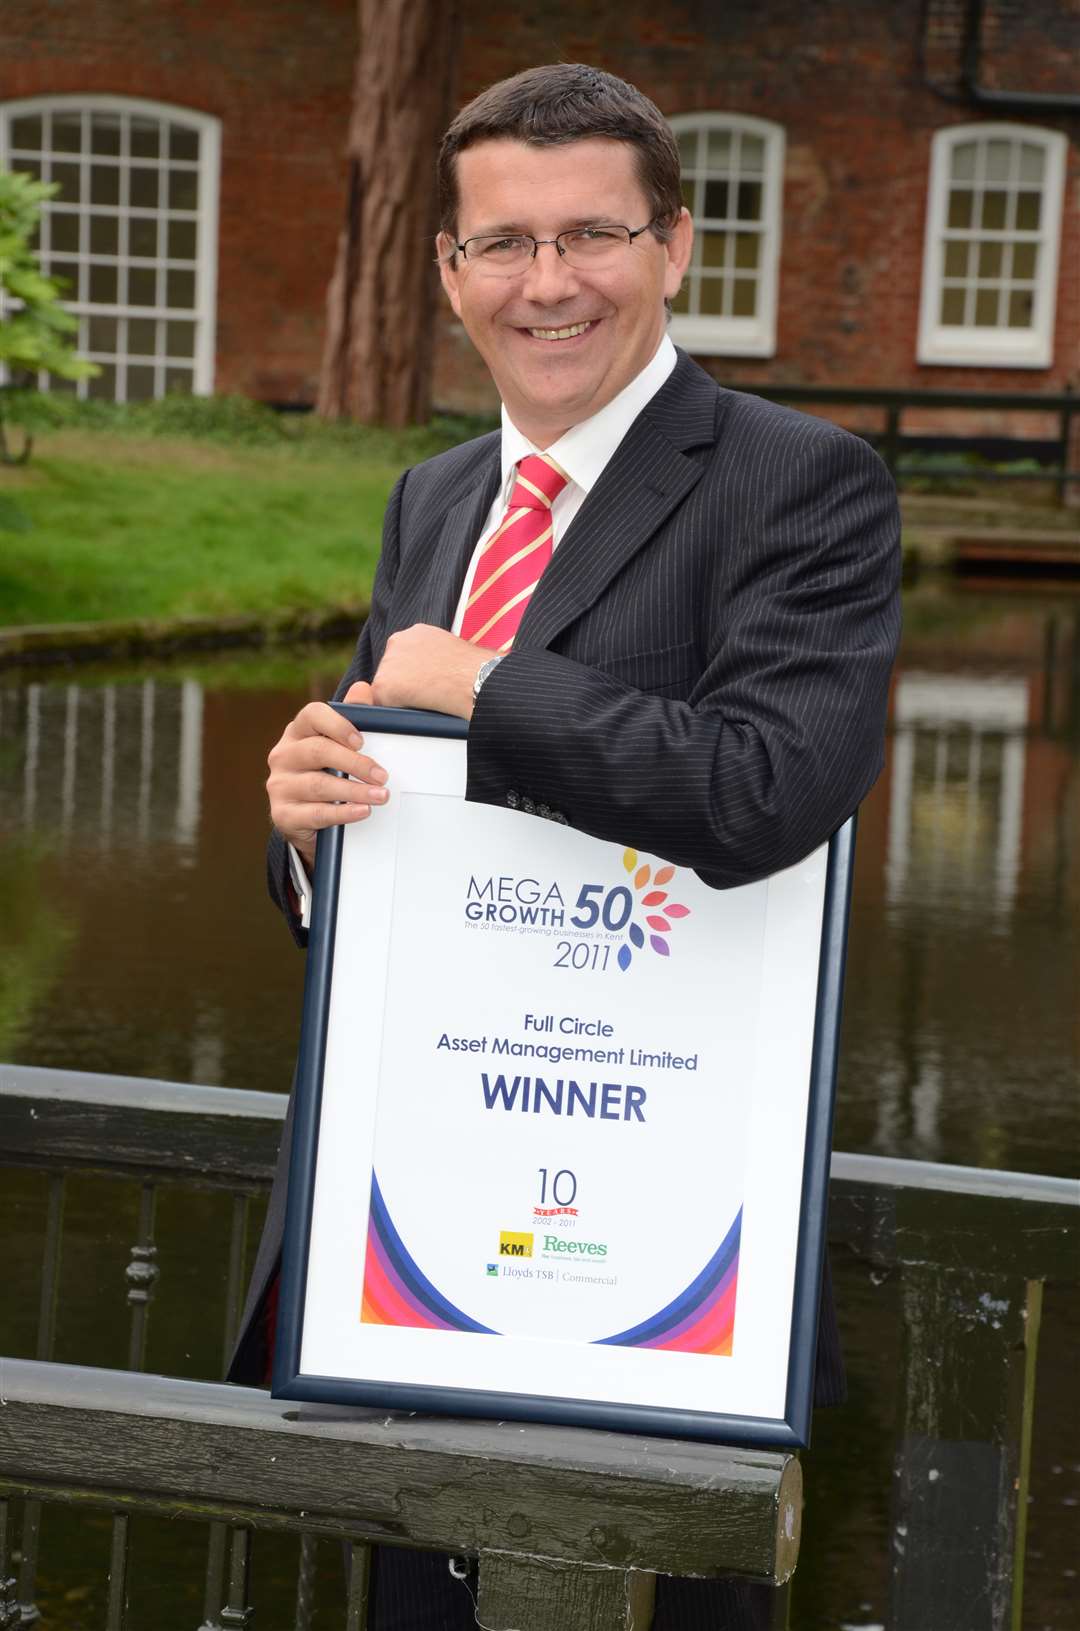 Full Circle Asset Management was the fastest-grower in 2011, with managing director Andrew Selsby picking up the certificate